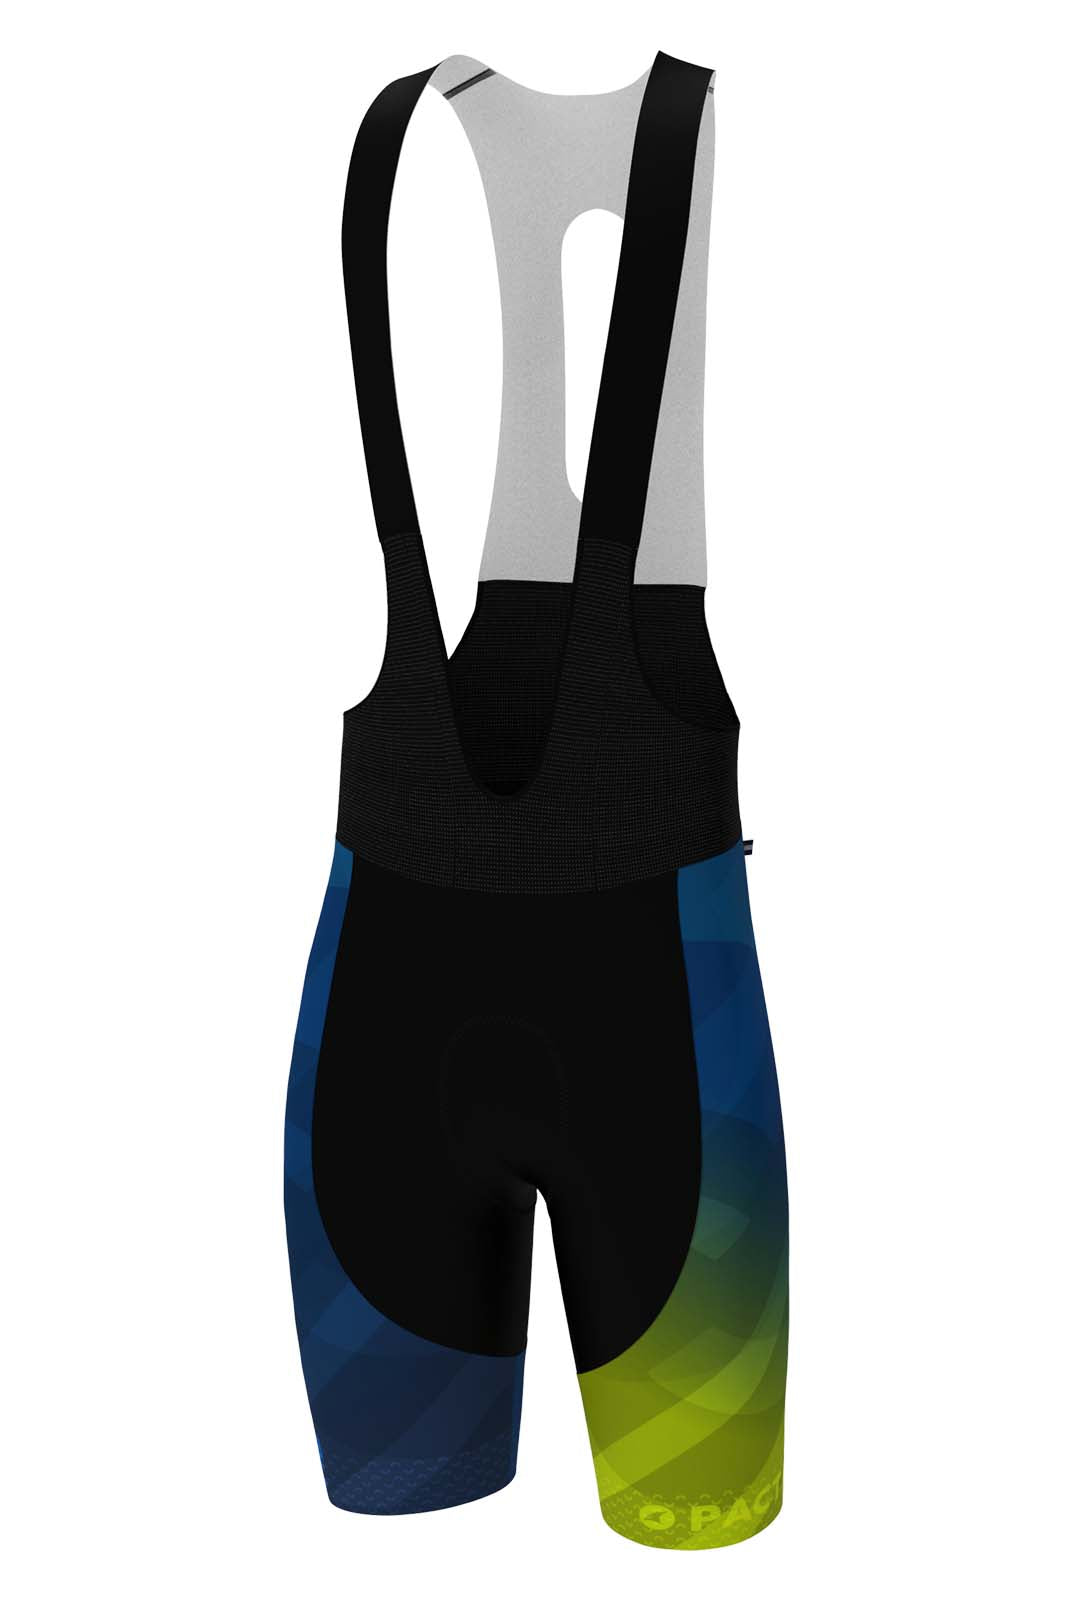 Men's PAC Flyte Cycling Bibs - Cool Fade Front View